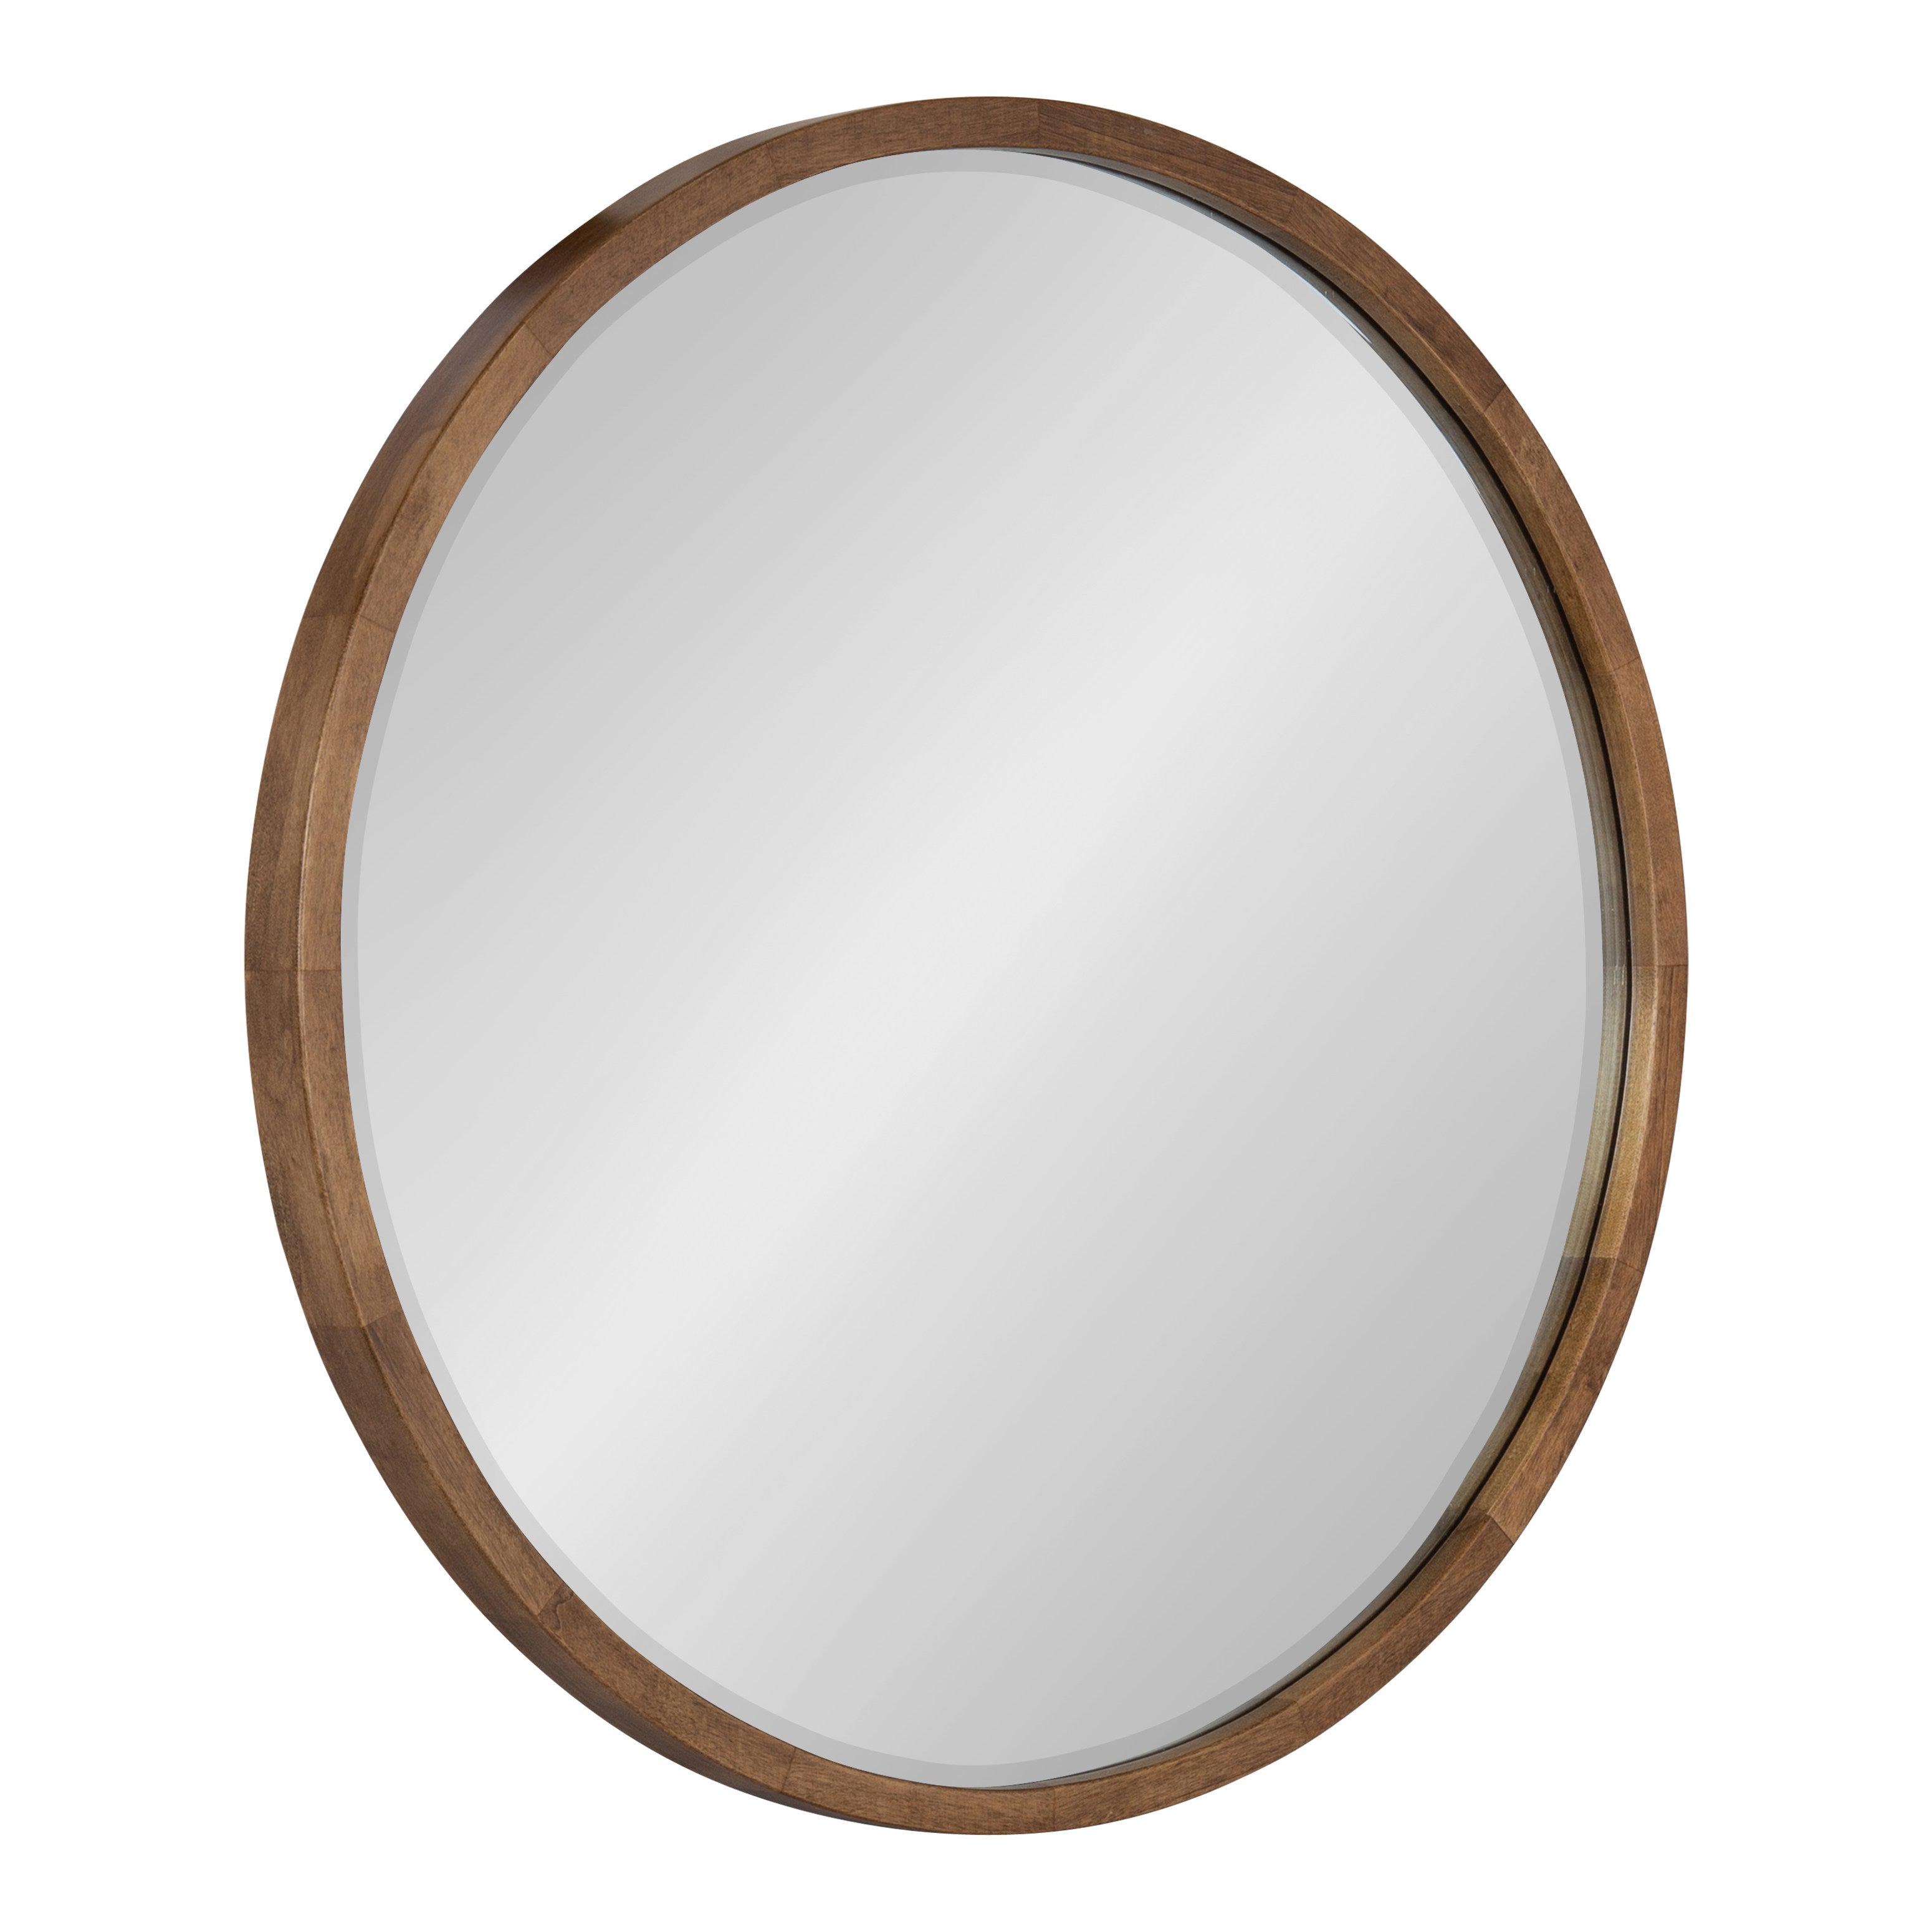 McLean Round Wood Framed Wall Mirror